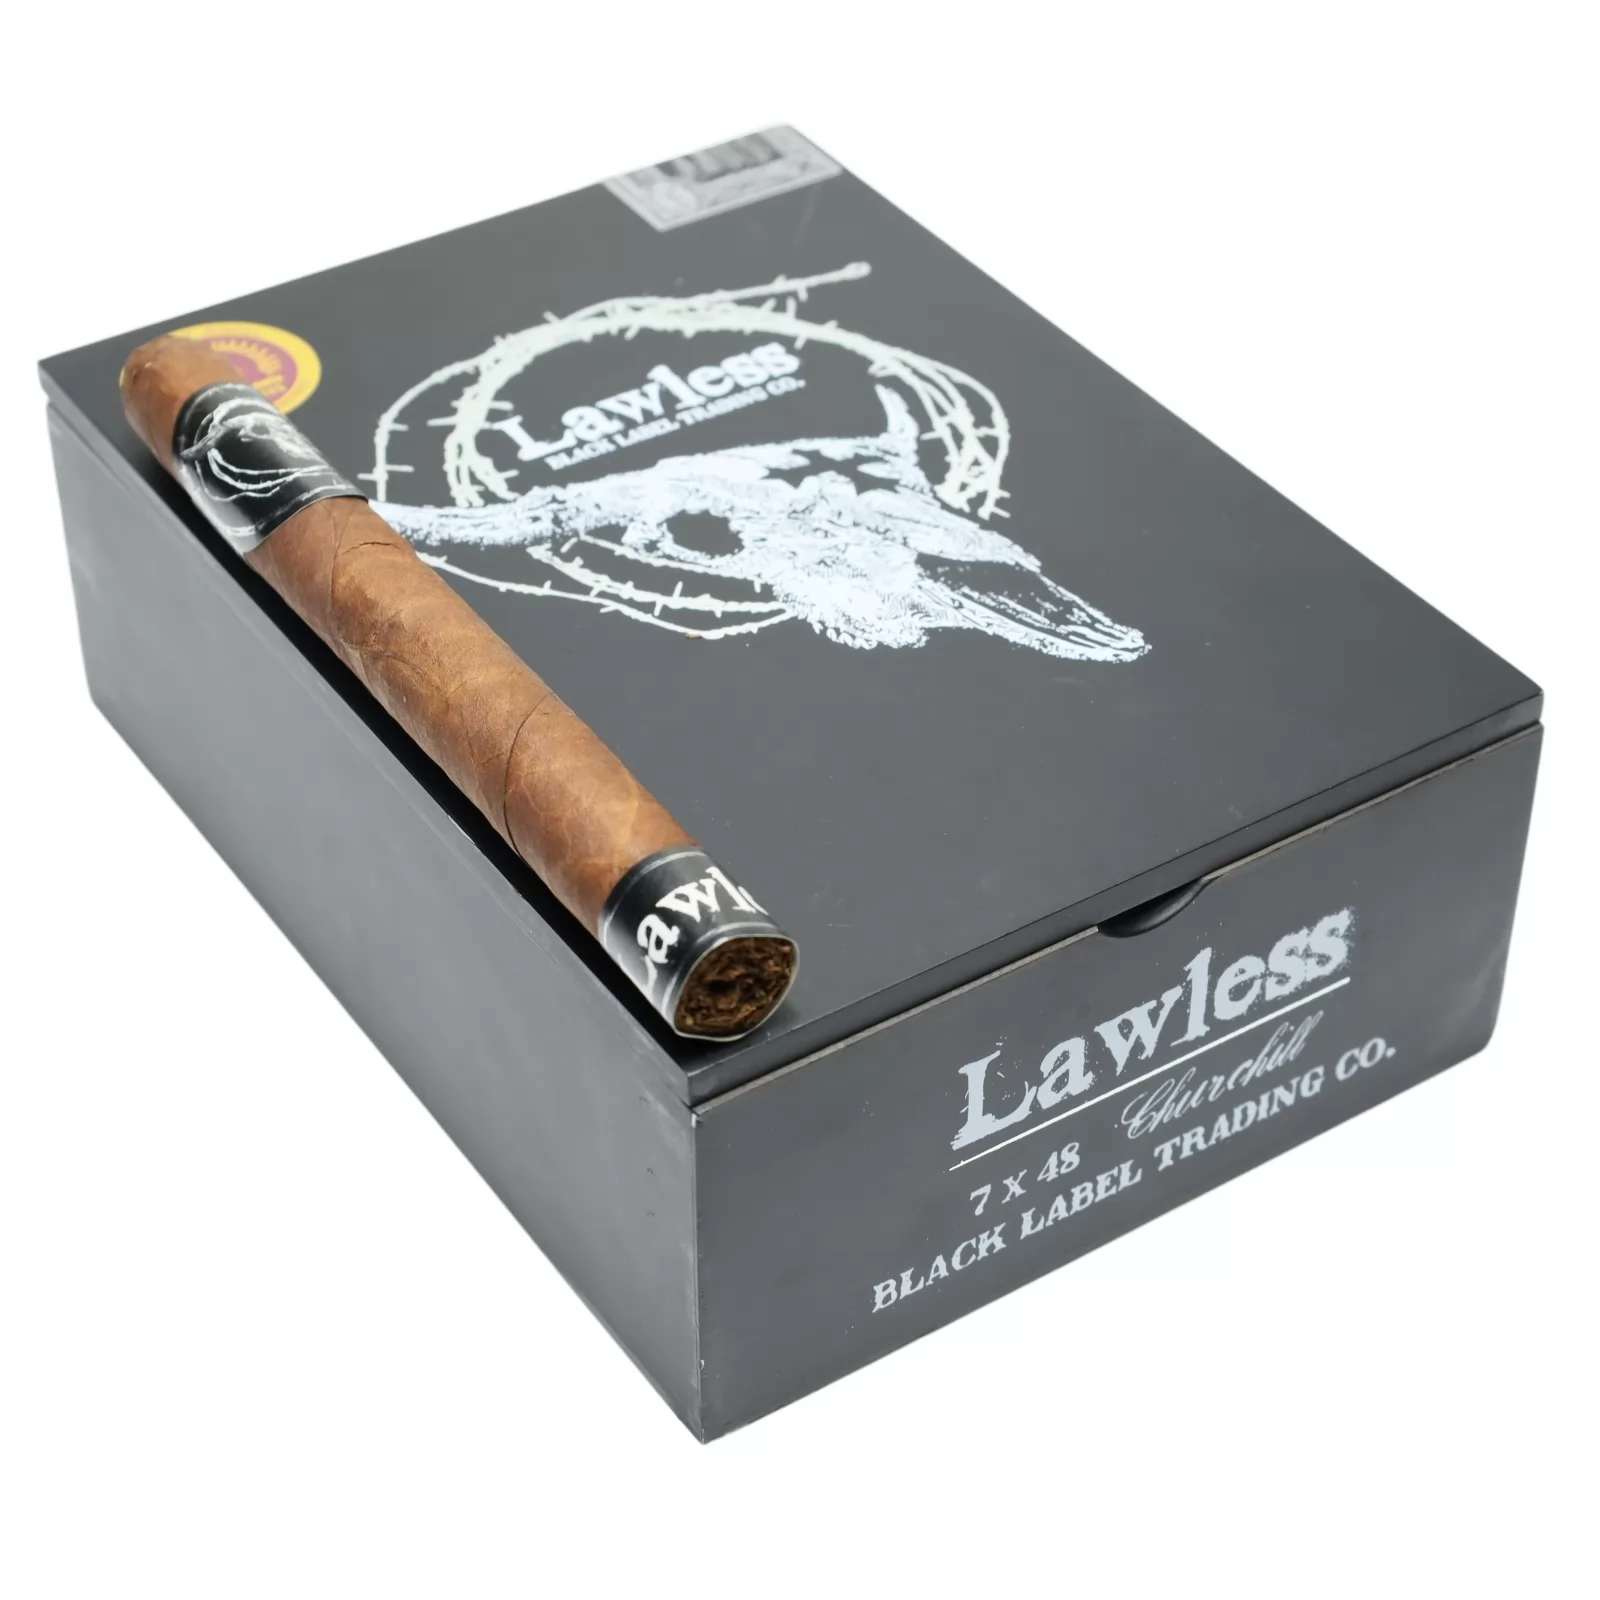 Black Label Trading Co. Lawless 7x48